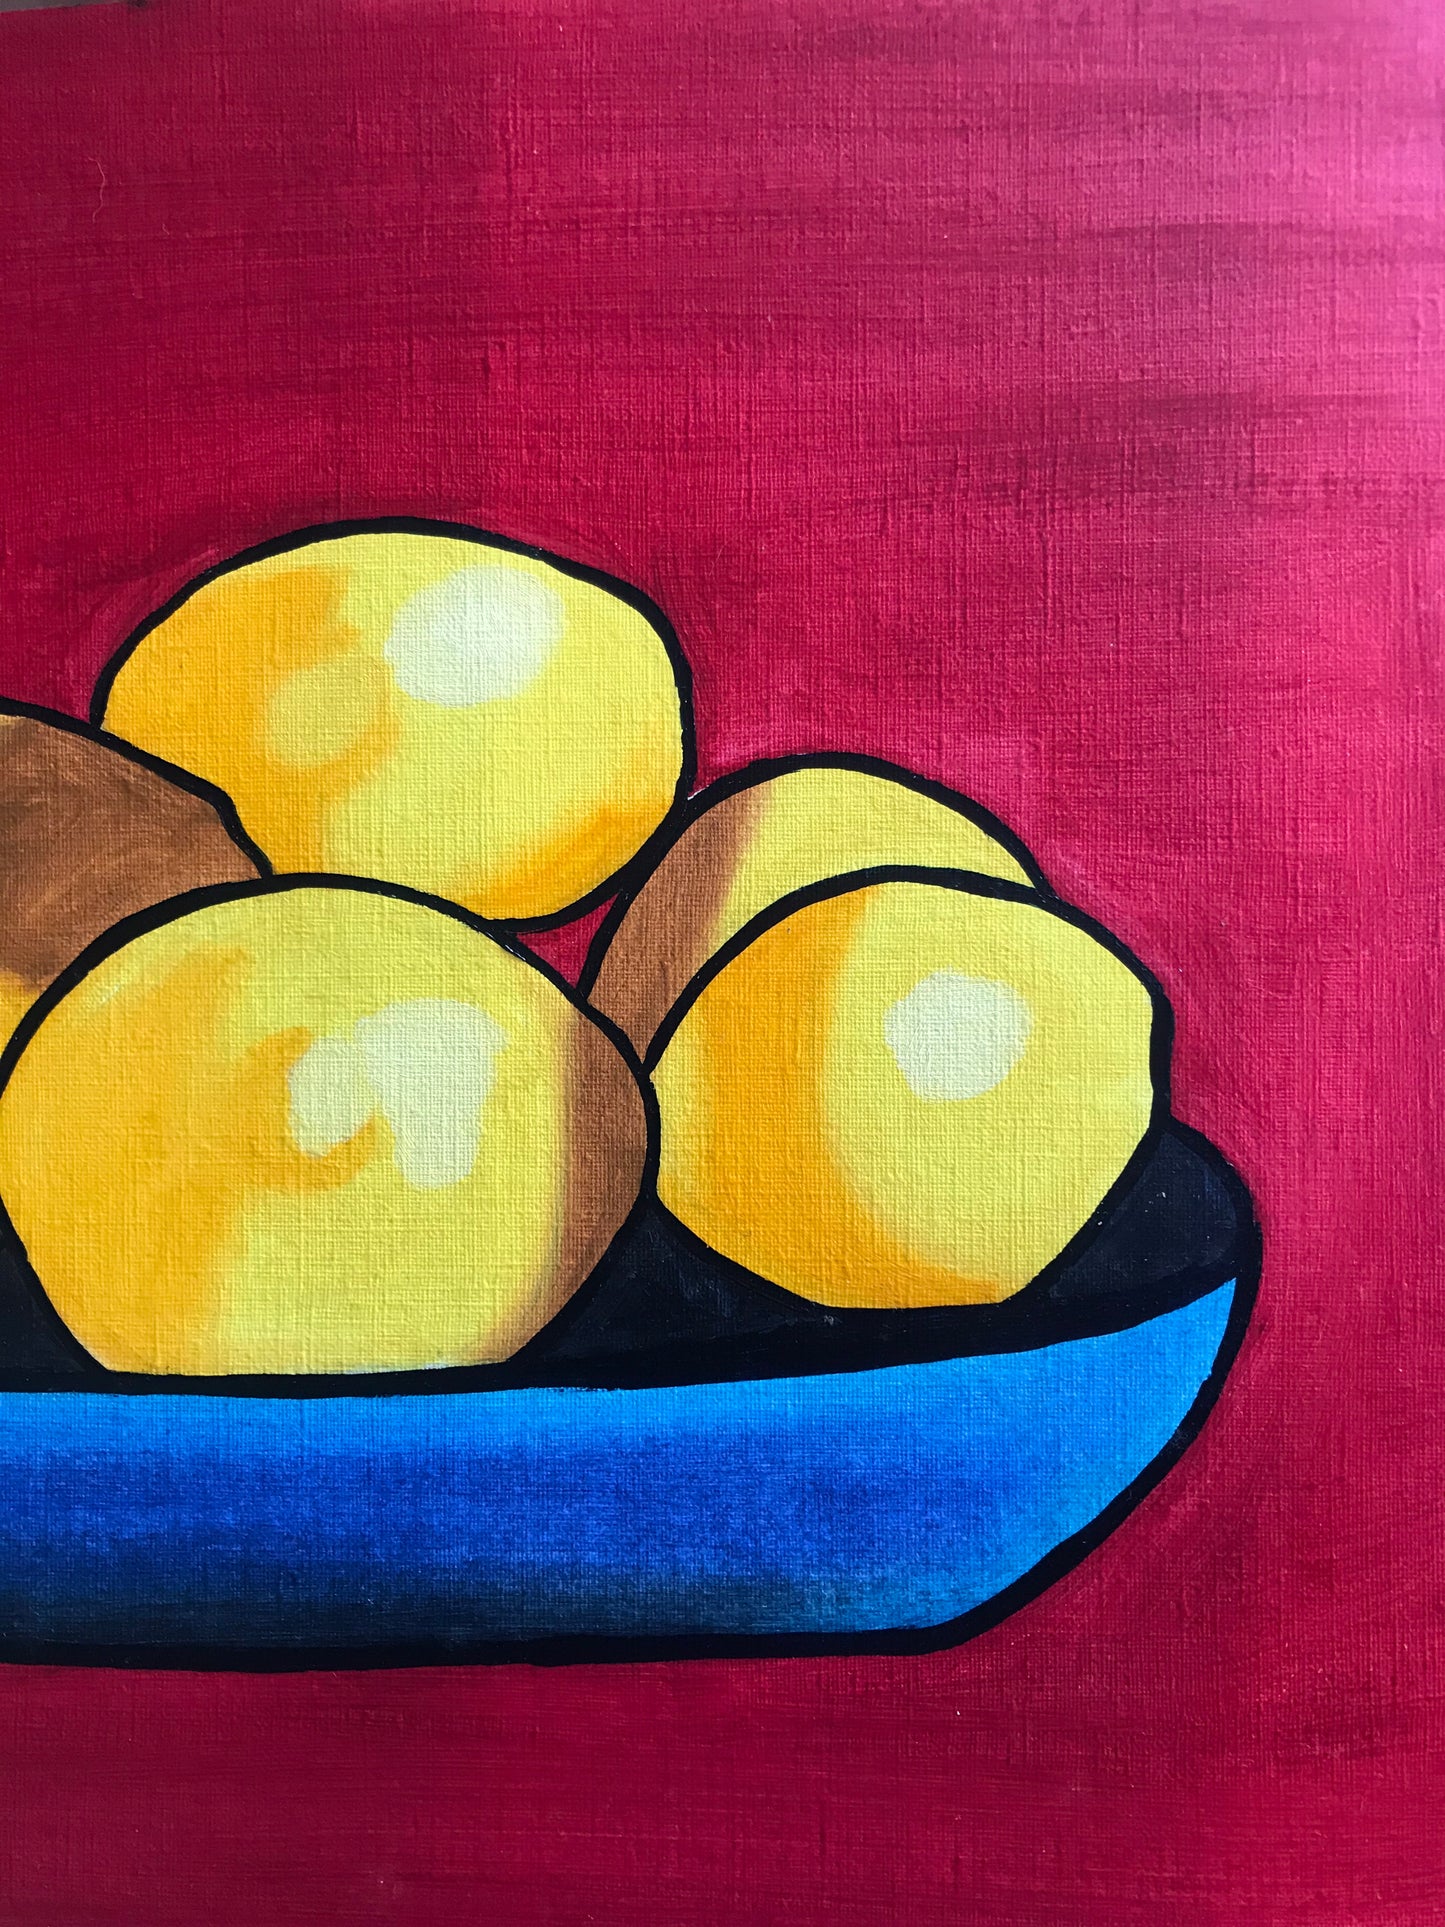 A happy art print of yellow lemons in a blue plate against a red background